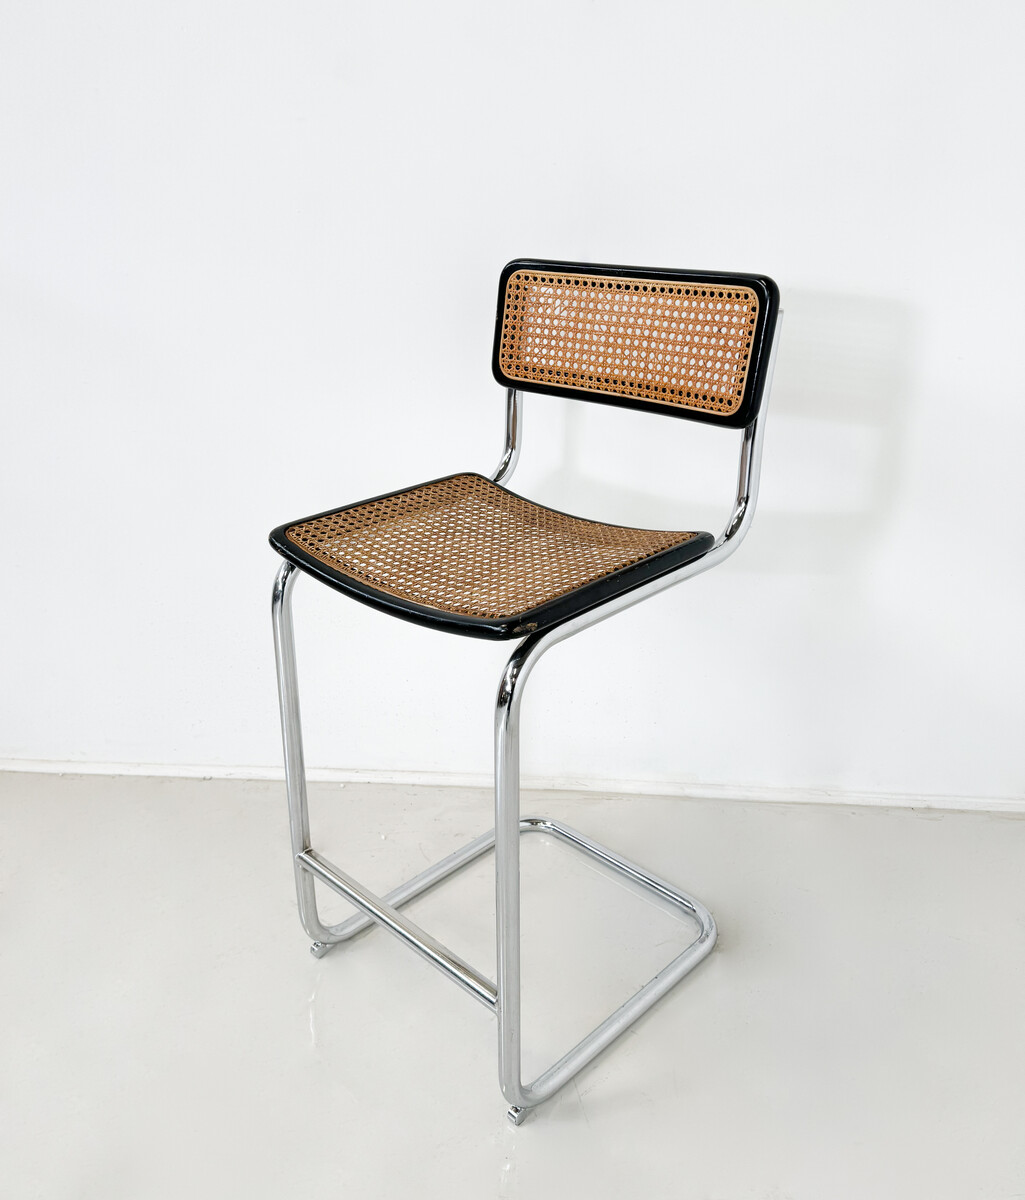 Mid-Century Modern Bar Stools, in the style of Marcel Breuer